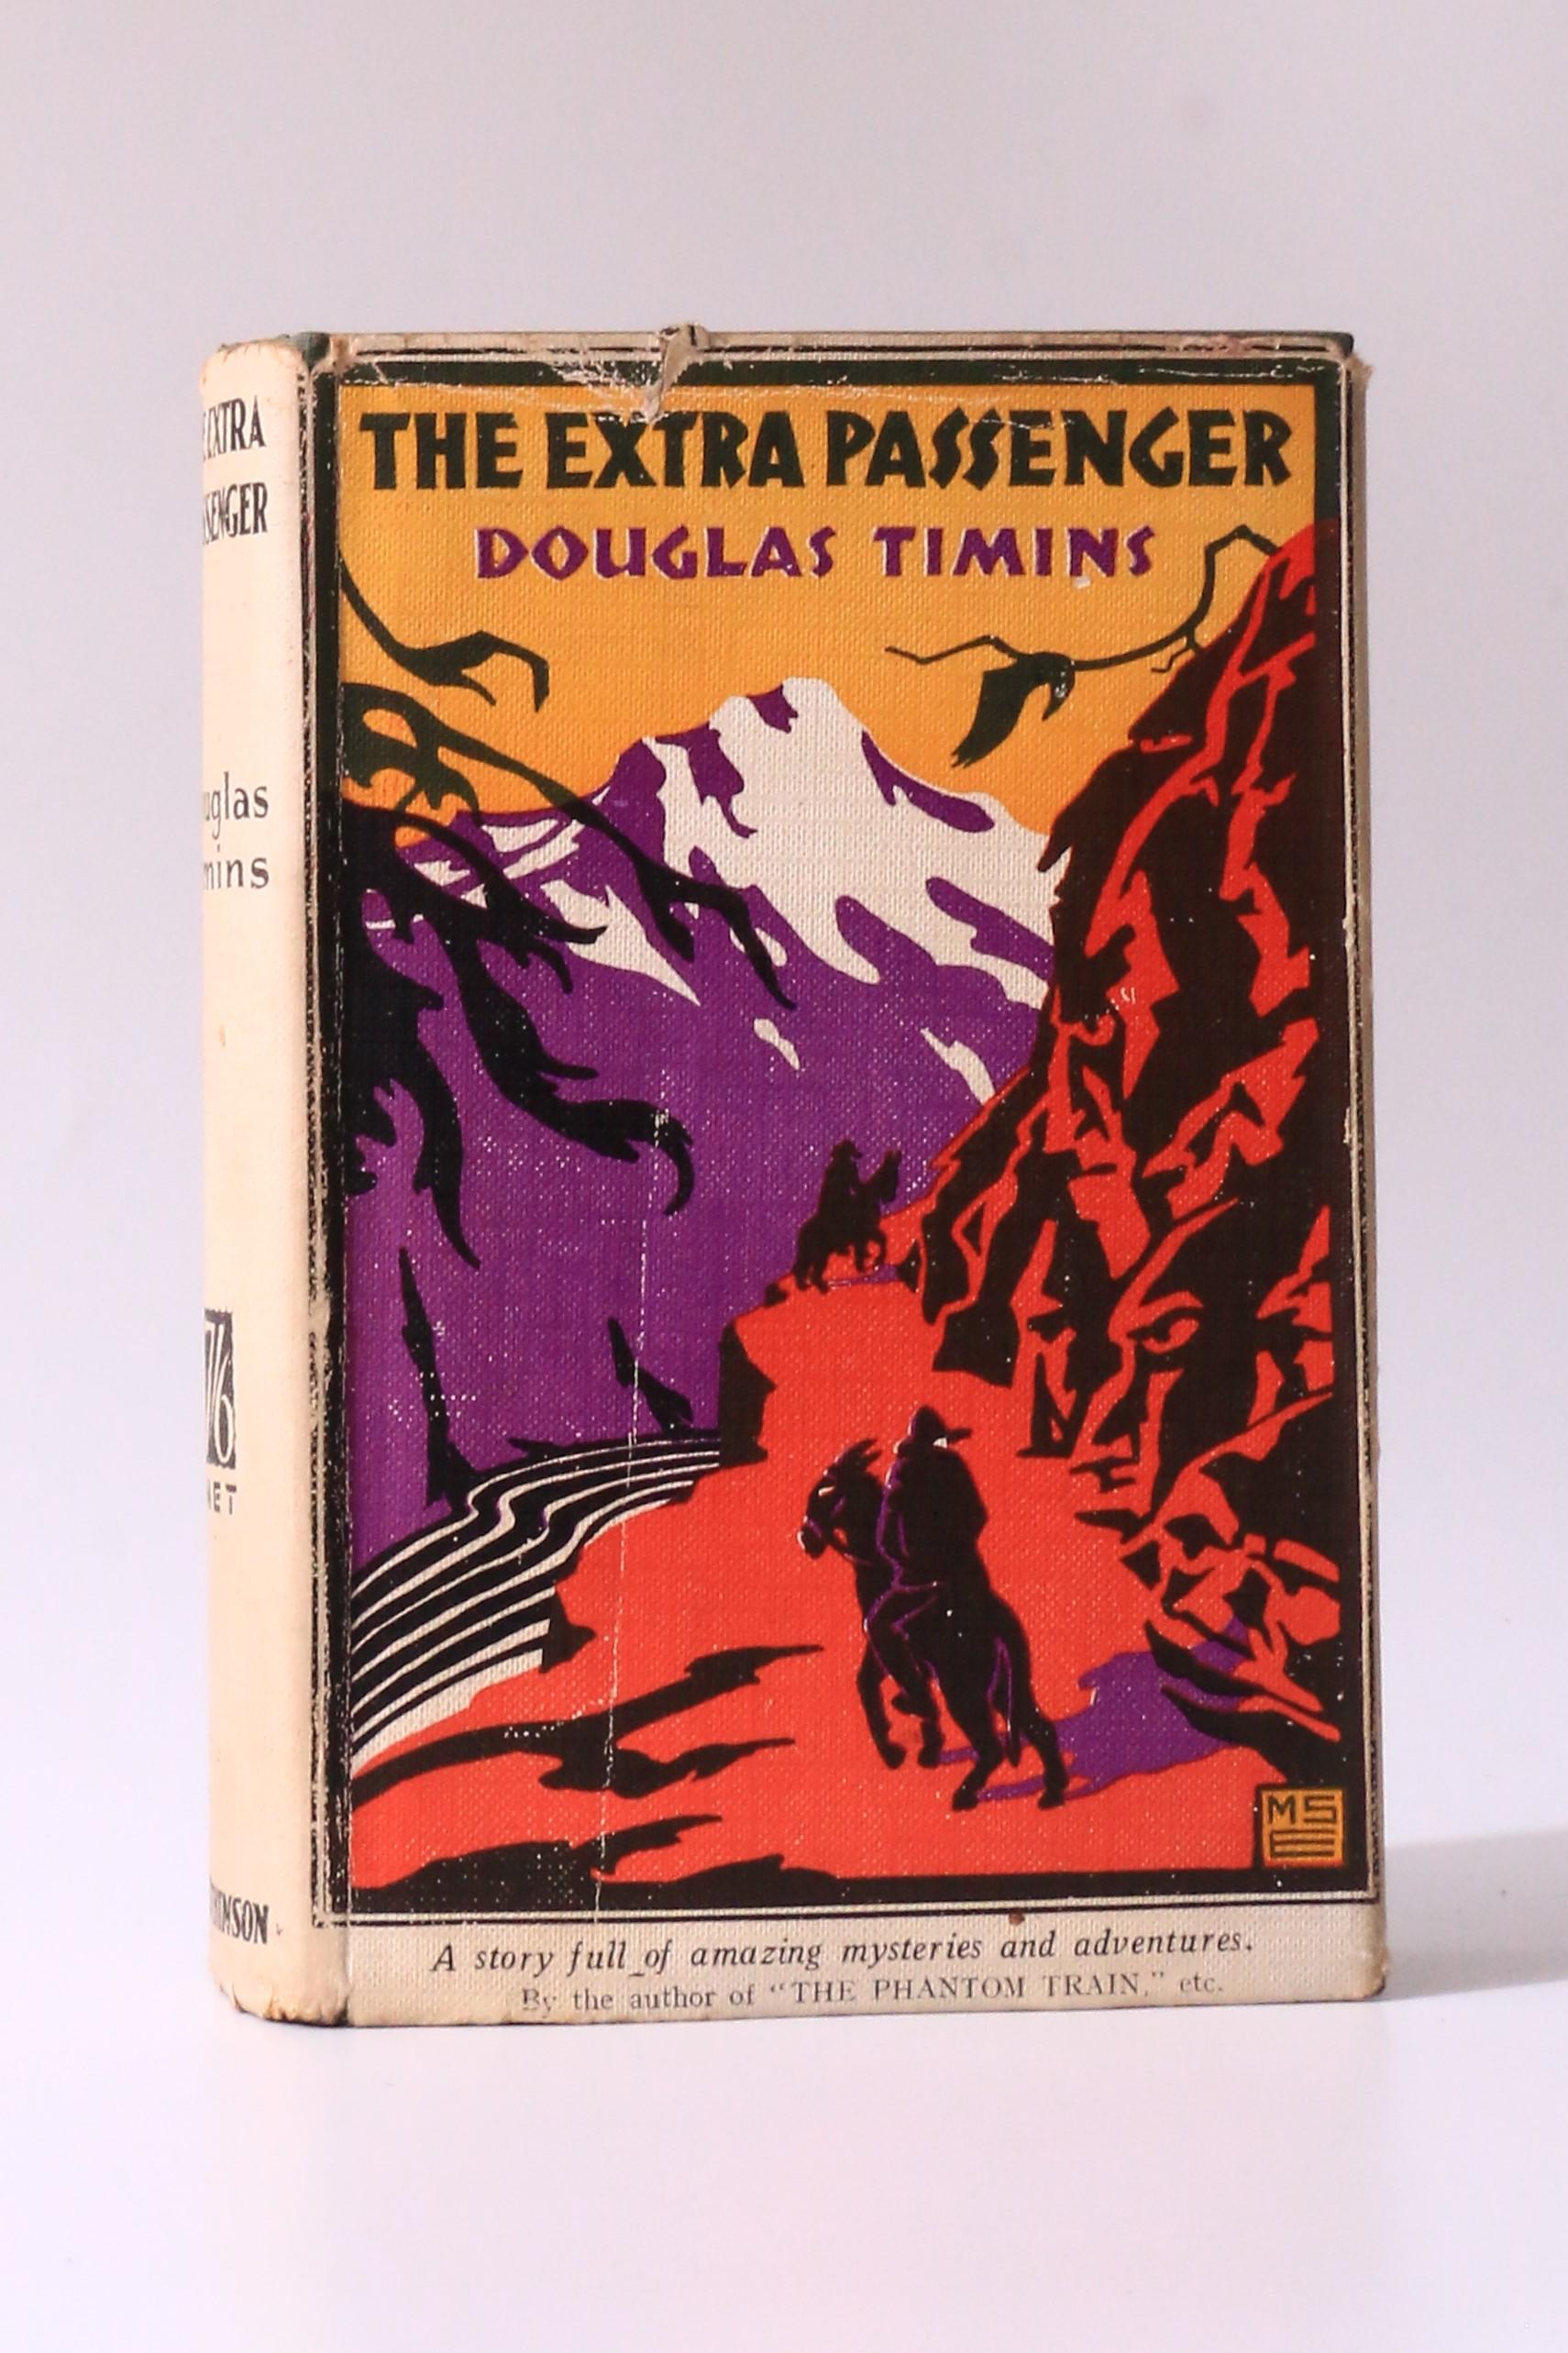 Douglas Timins - The Extra Passenger - Hutchinson, n.d. [1928], Signed First Edition.